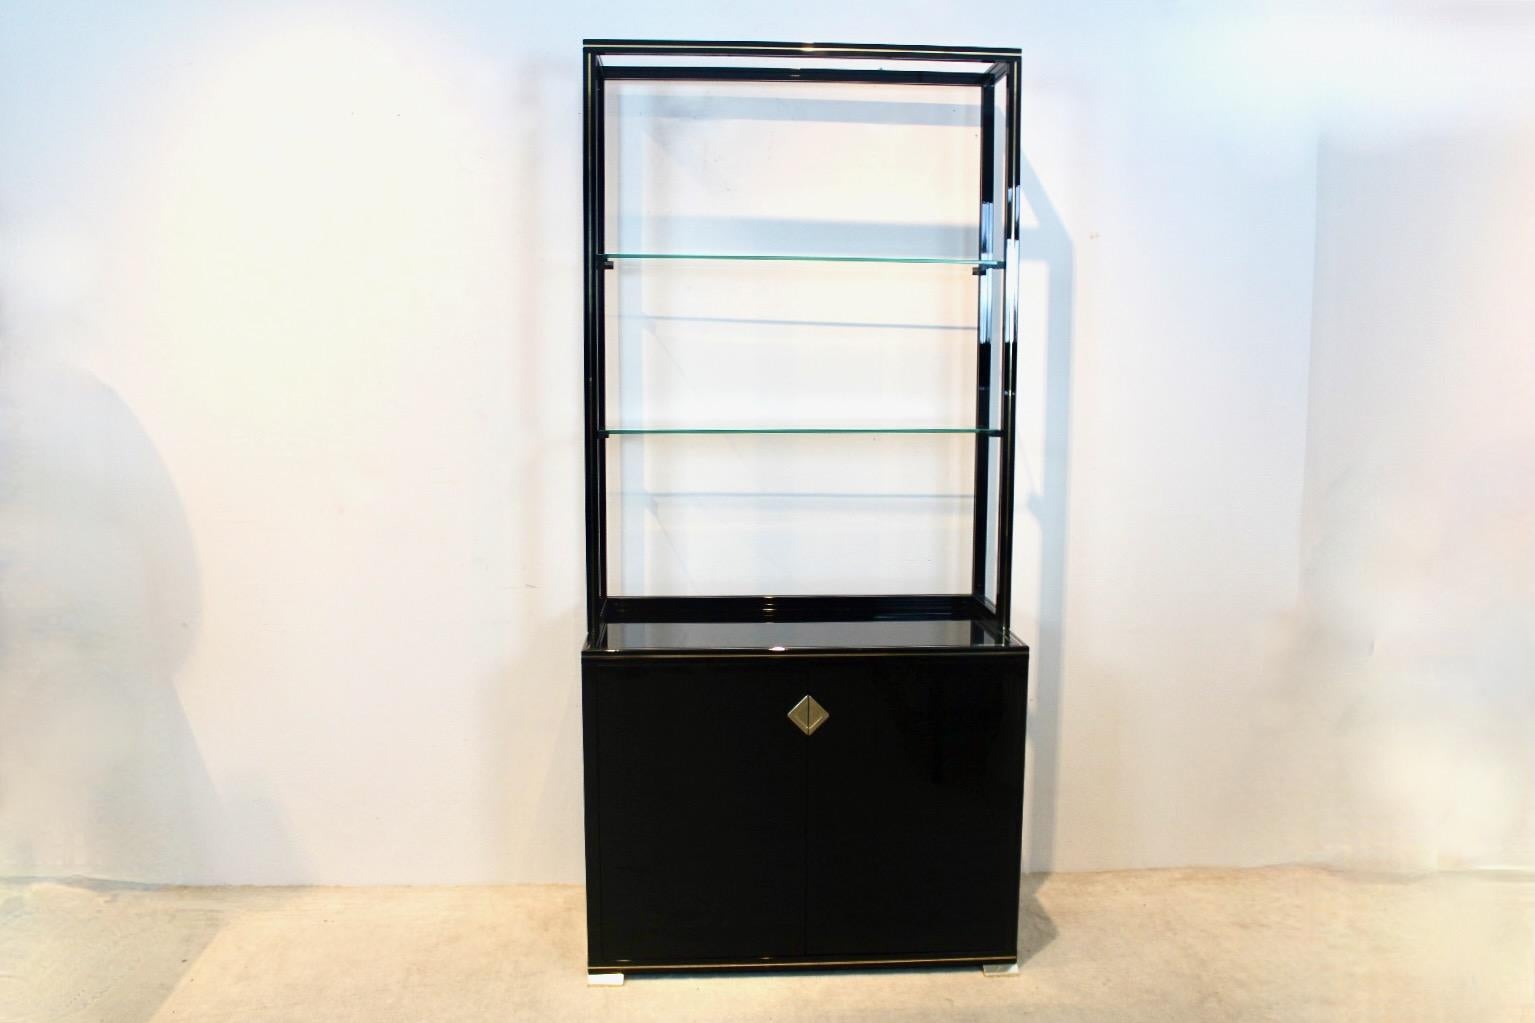 Charming Pierre Vandel Paris black lacquered French Cabinet with stylish gold trim and handles. The unit has a small sideboard base with two doors and a removable upper part with shelving and display function, coming with two glass tiers (no chips